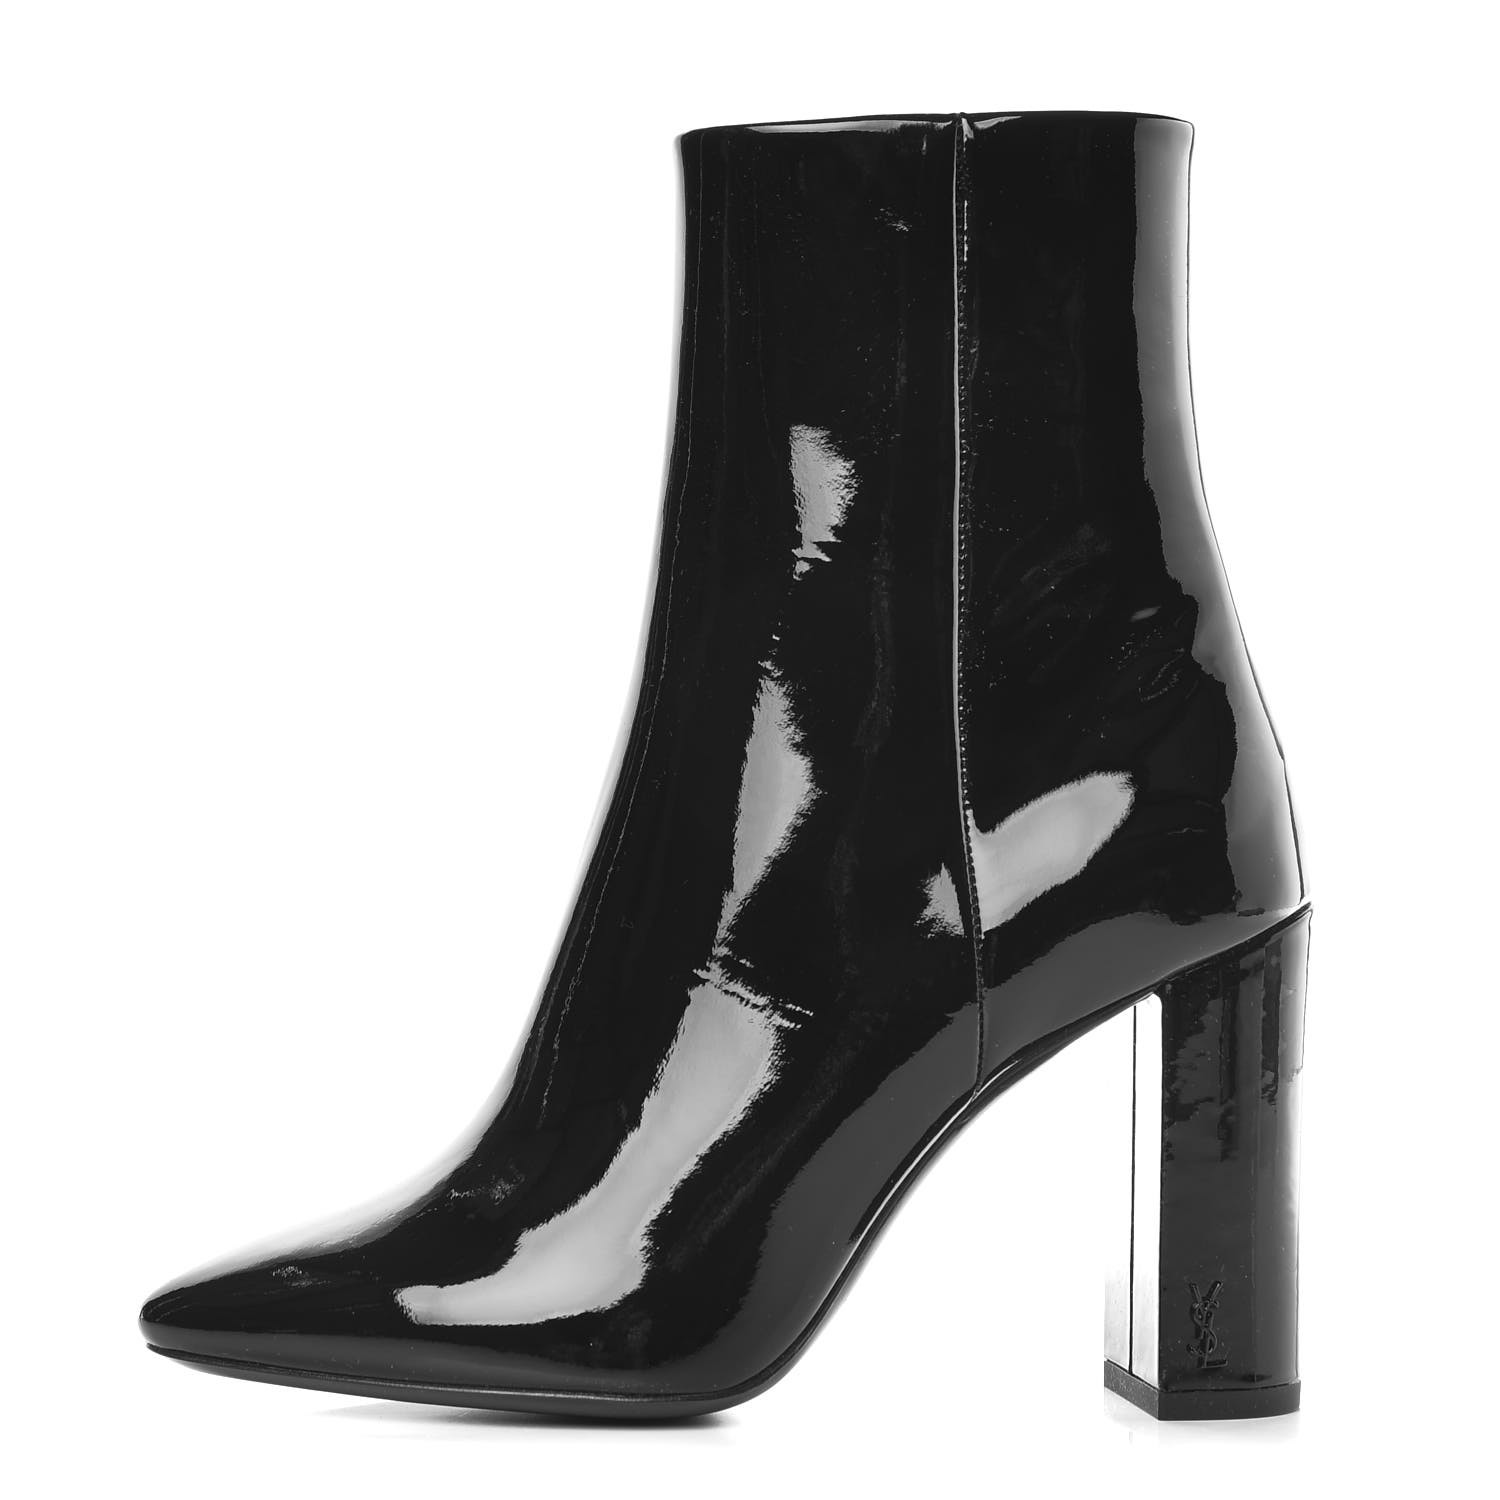 ysl patent leather boots